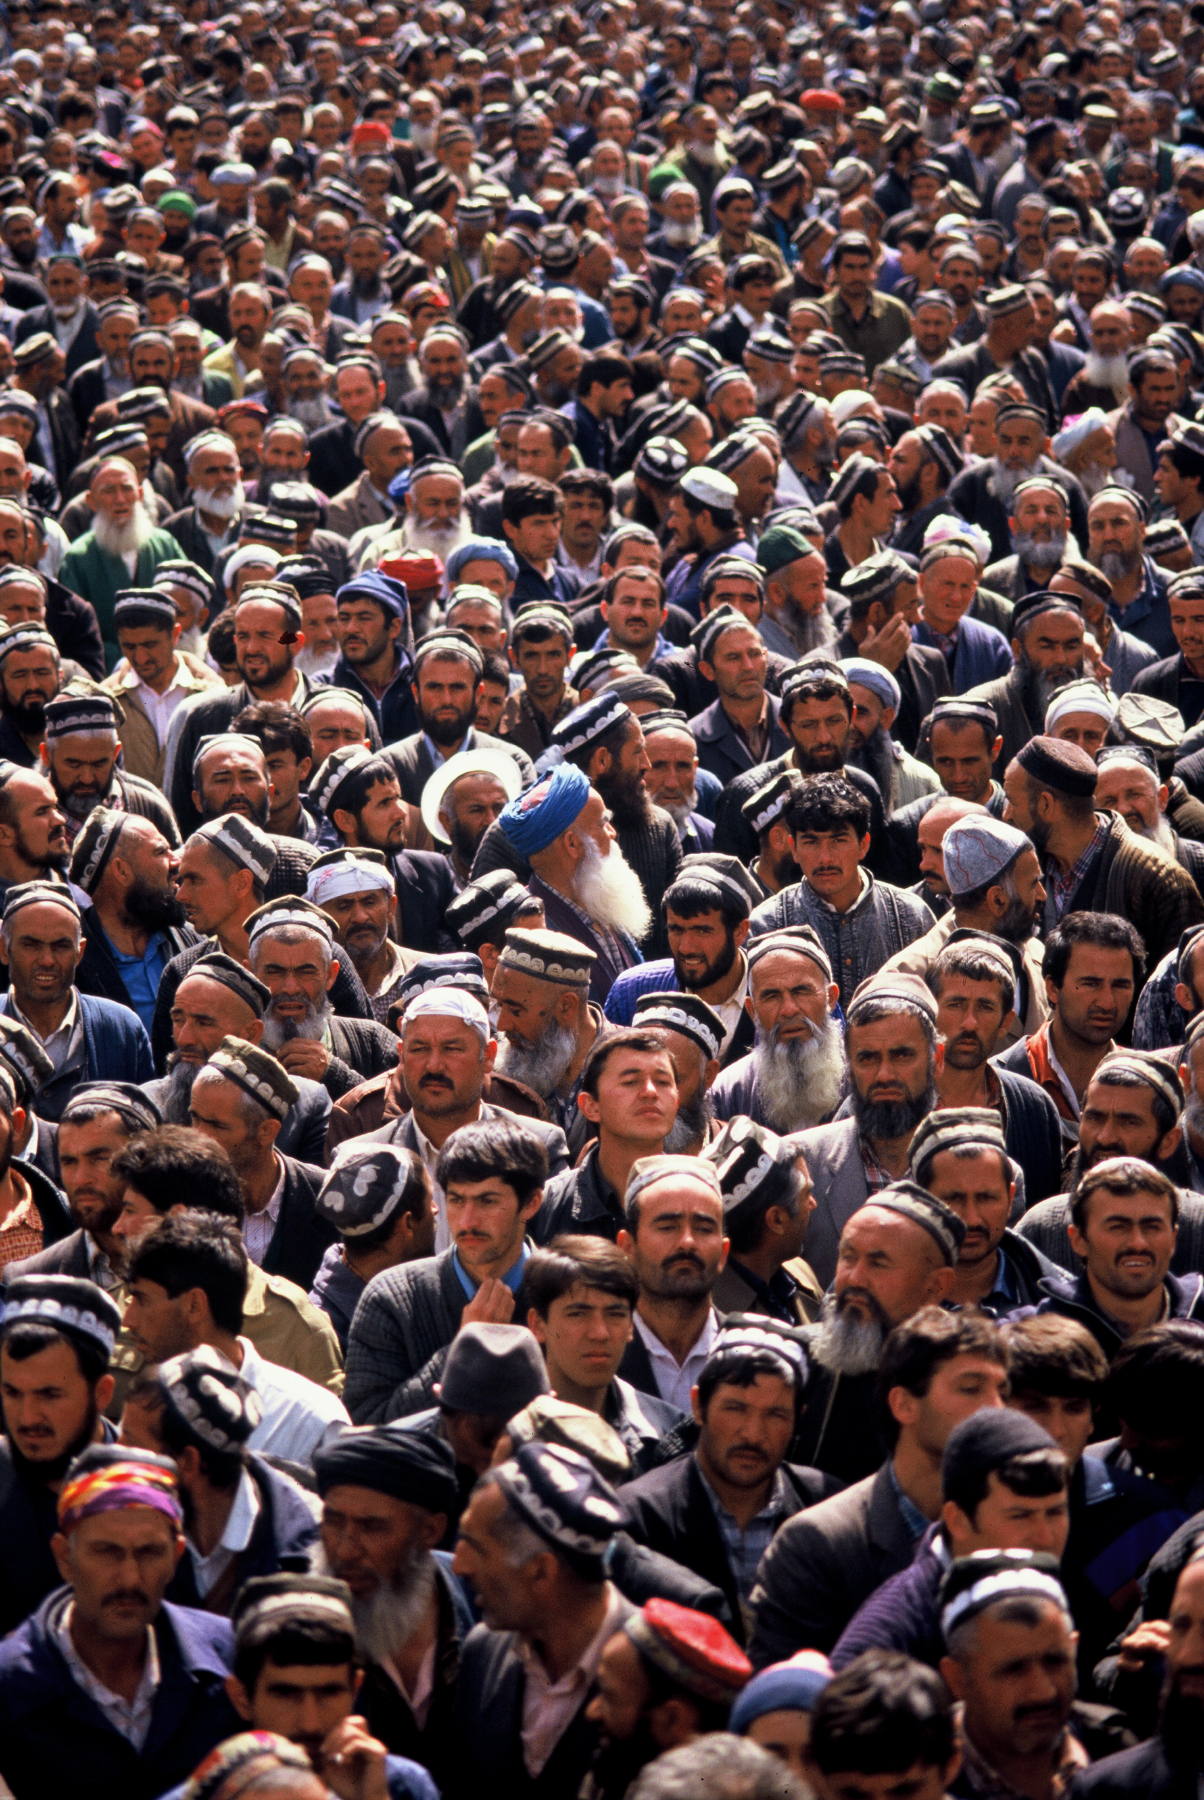  Islamic Renaissance Party members during a protest to overthrow the Soviet backed government in power in Dushanbe, Tajikistan.&nbsp;1992 